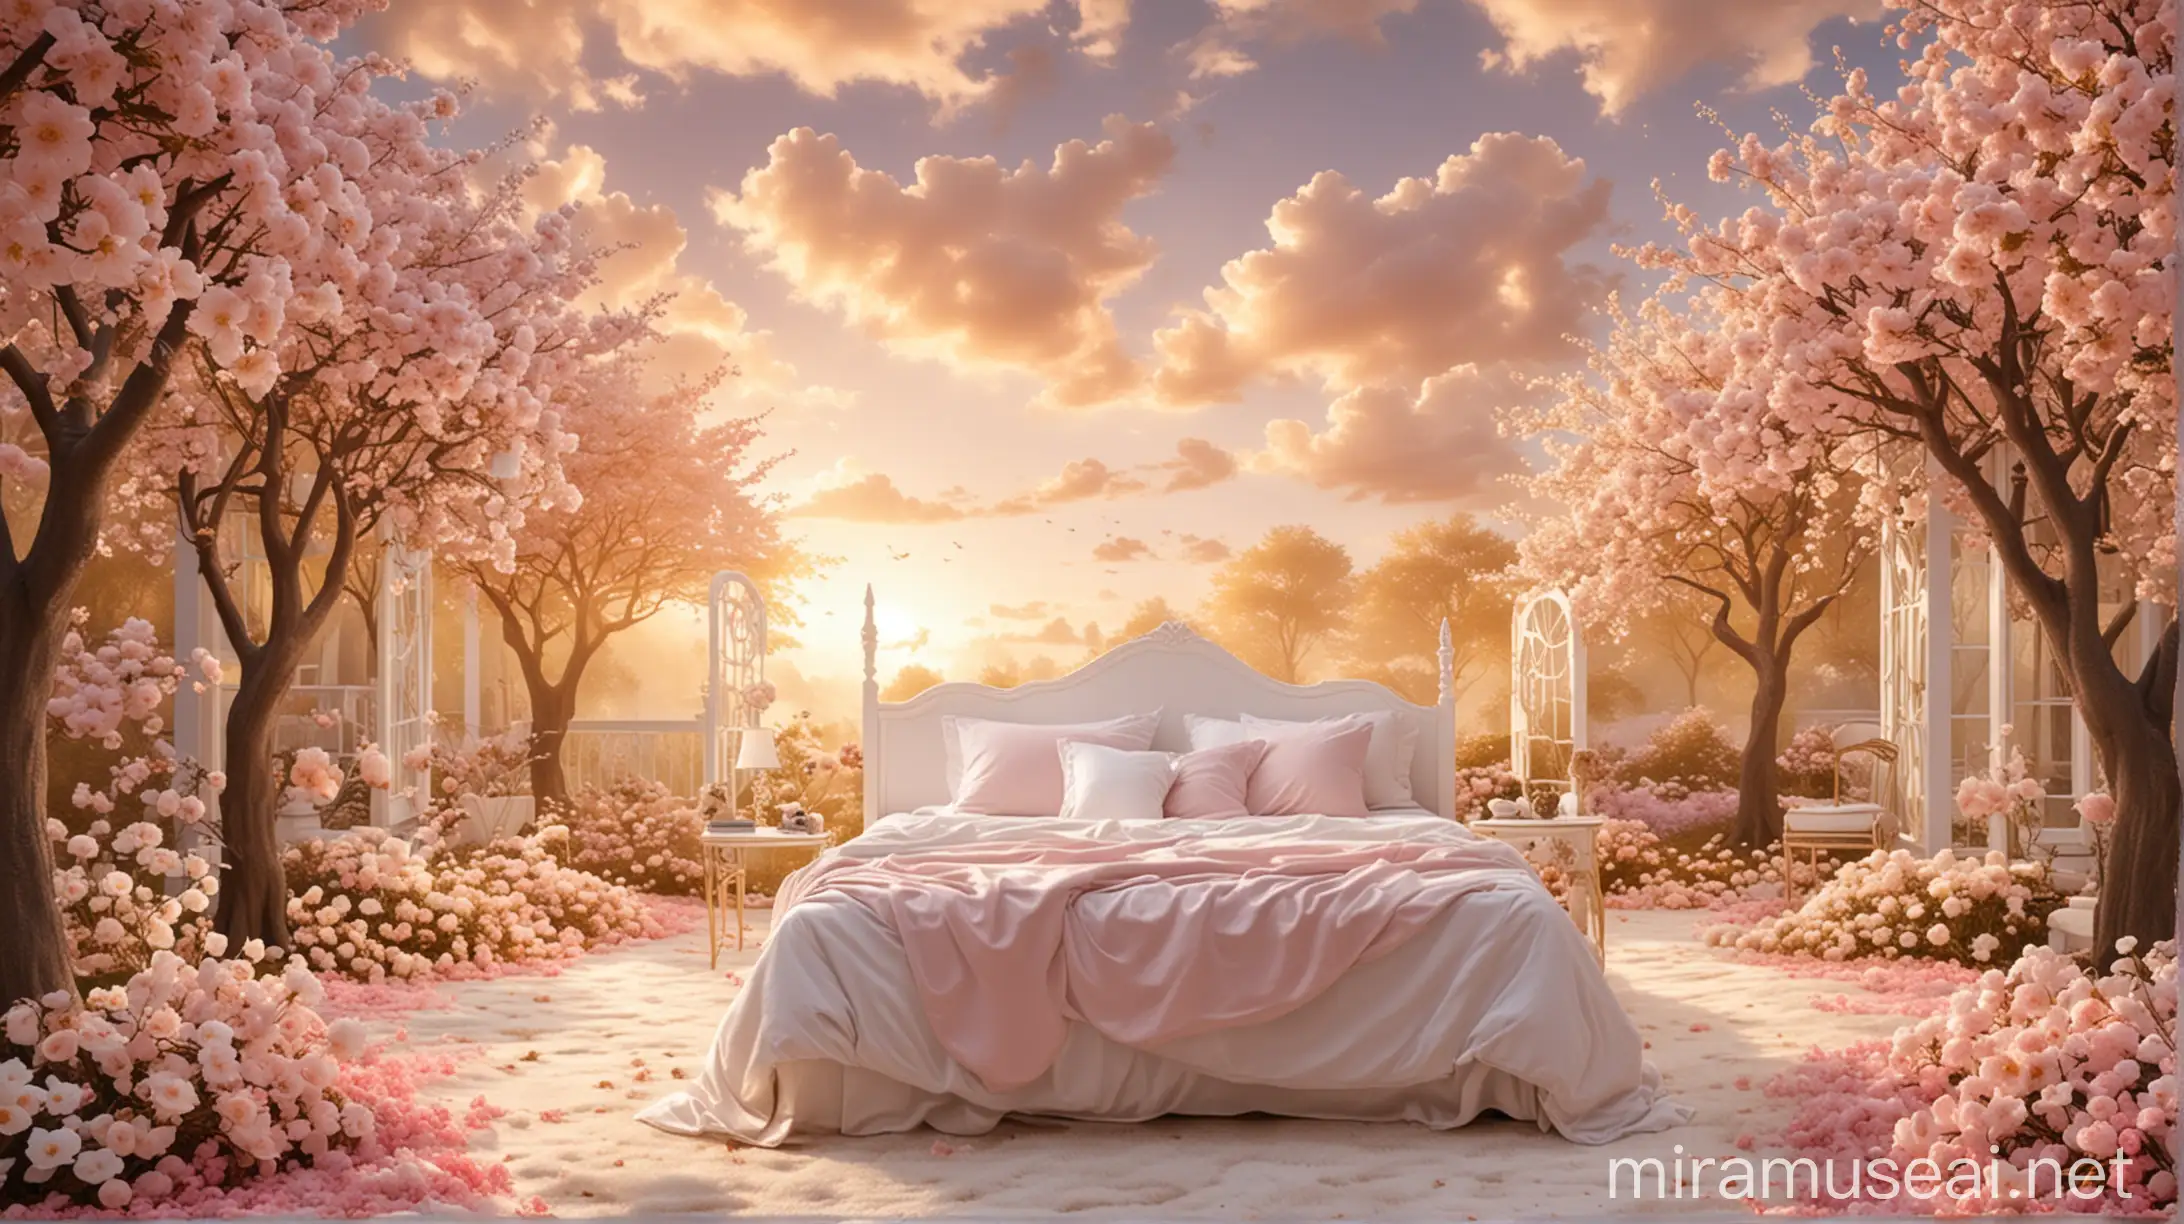 

The background is fantasy heaven. Everything is almost white.
The ground looks like clouds. Trees and flowers are mainly light pink.
There is a white twin bed in the garden.
There is a golden glow in the air.

